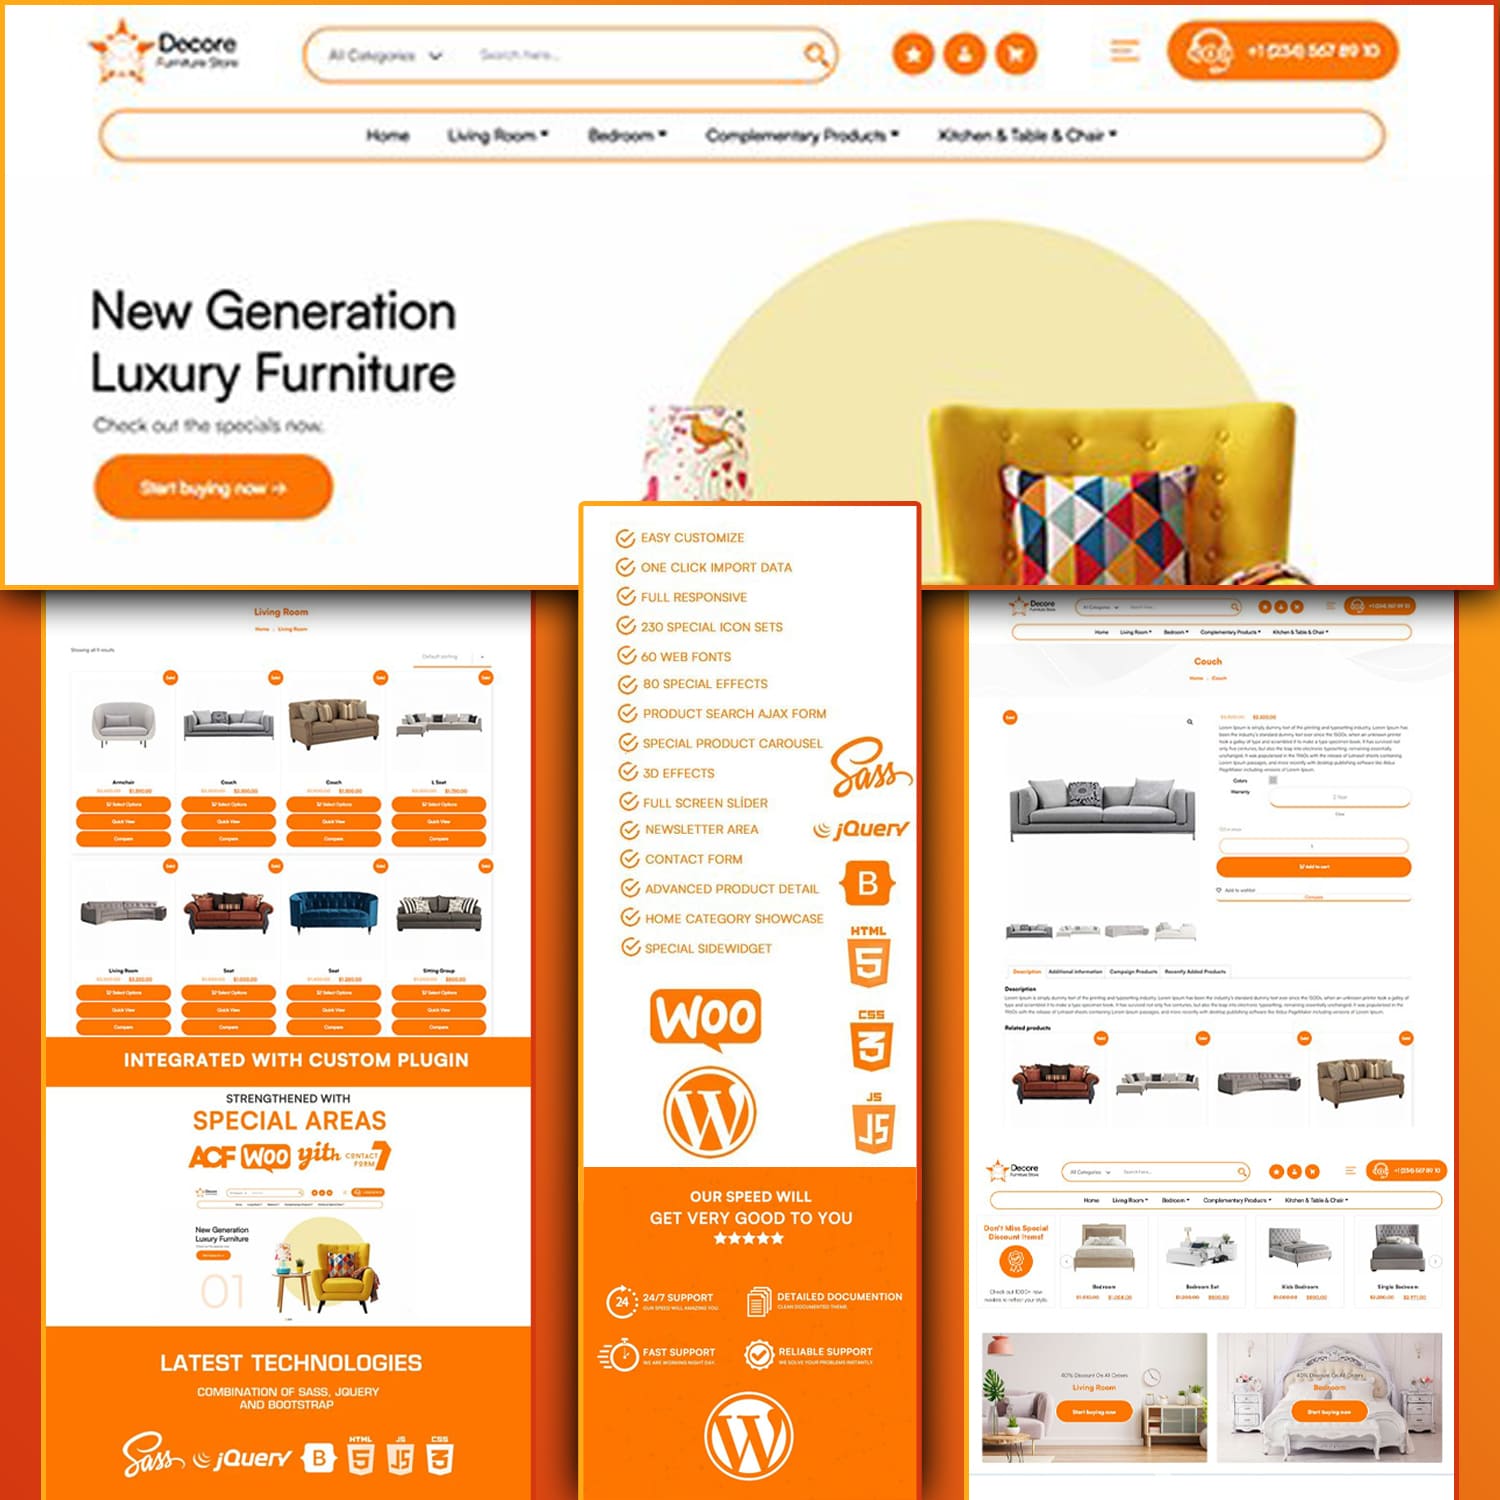 80 special effects of Decora - Furniture Store WooCommerce WordPress Theme.